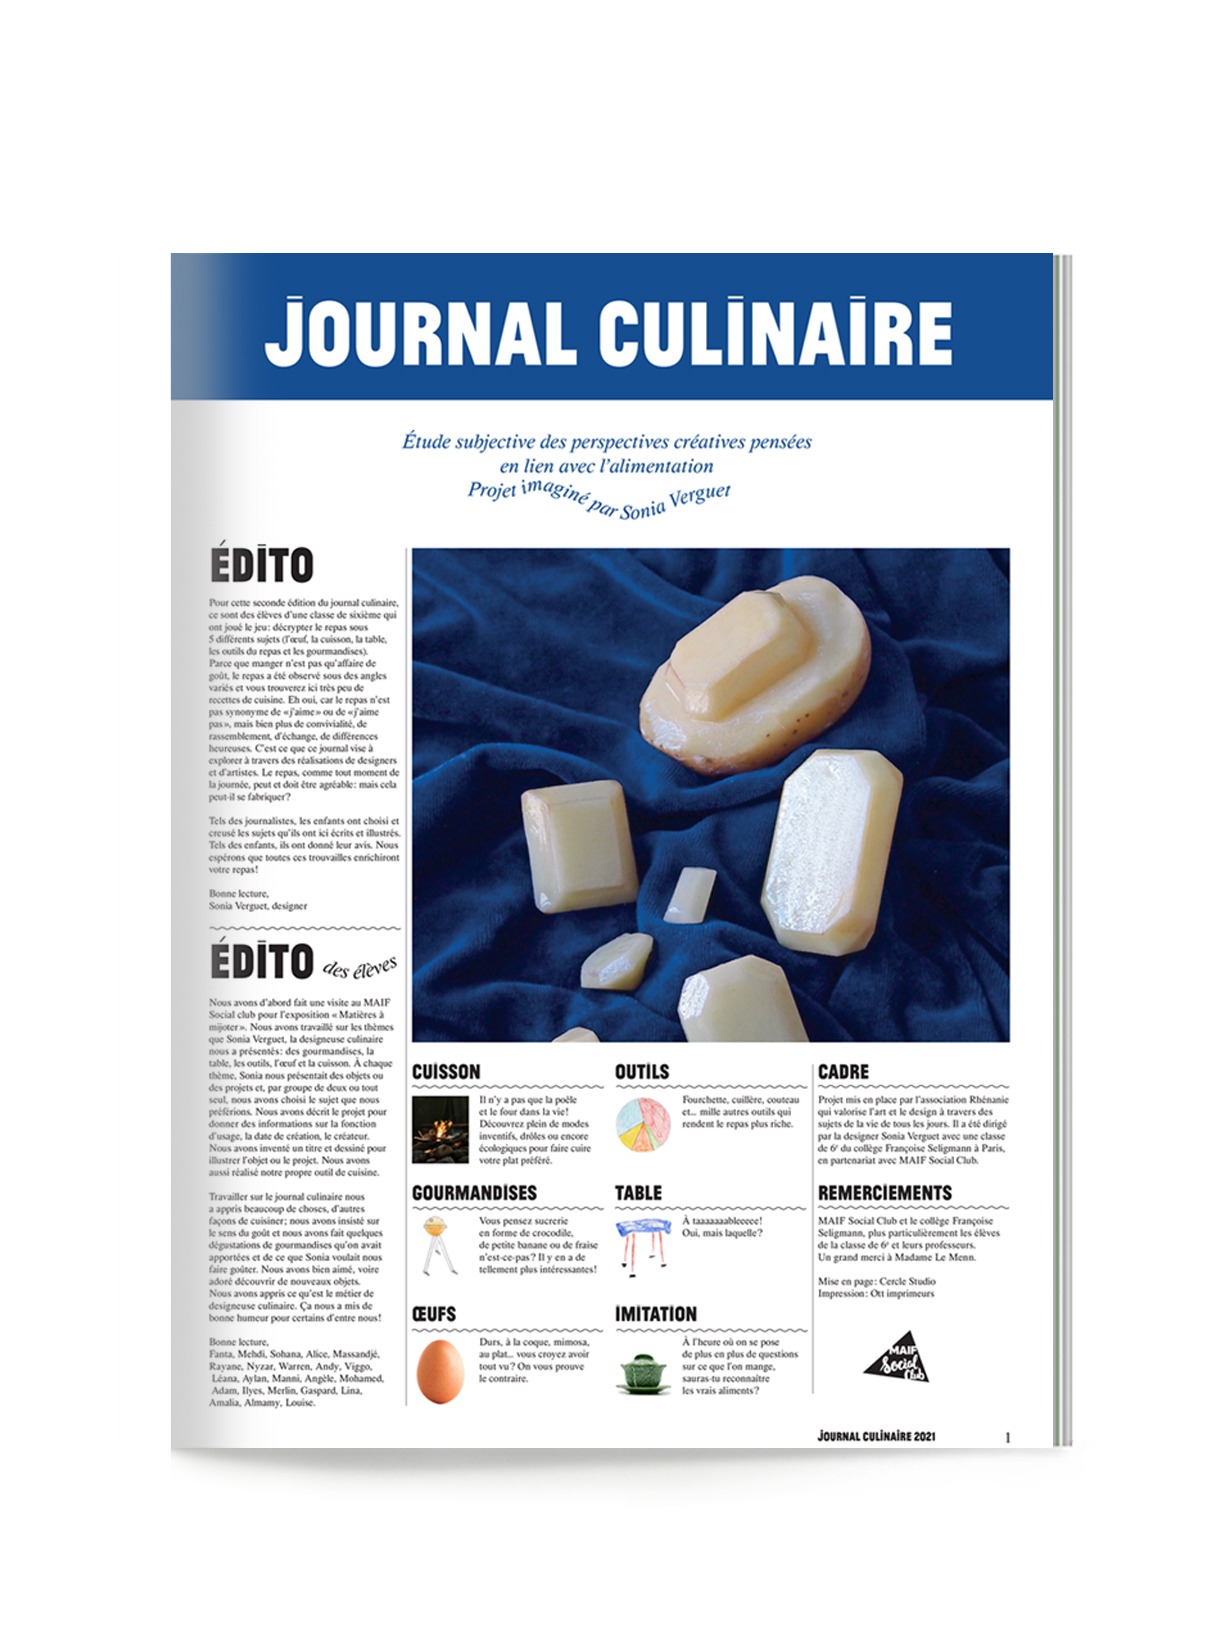 Journal culinaire